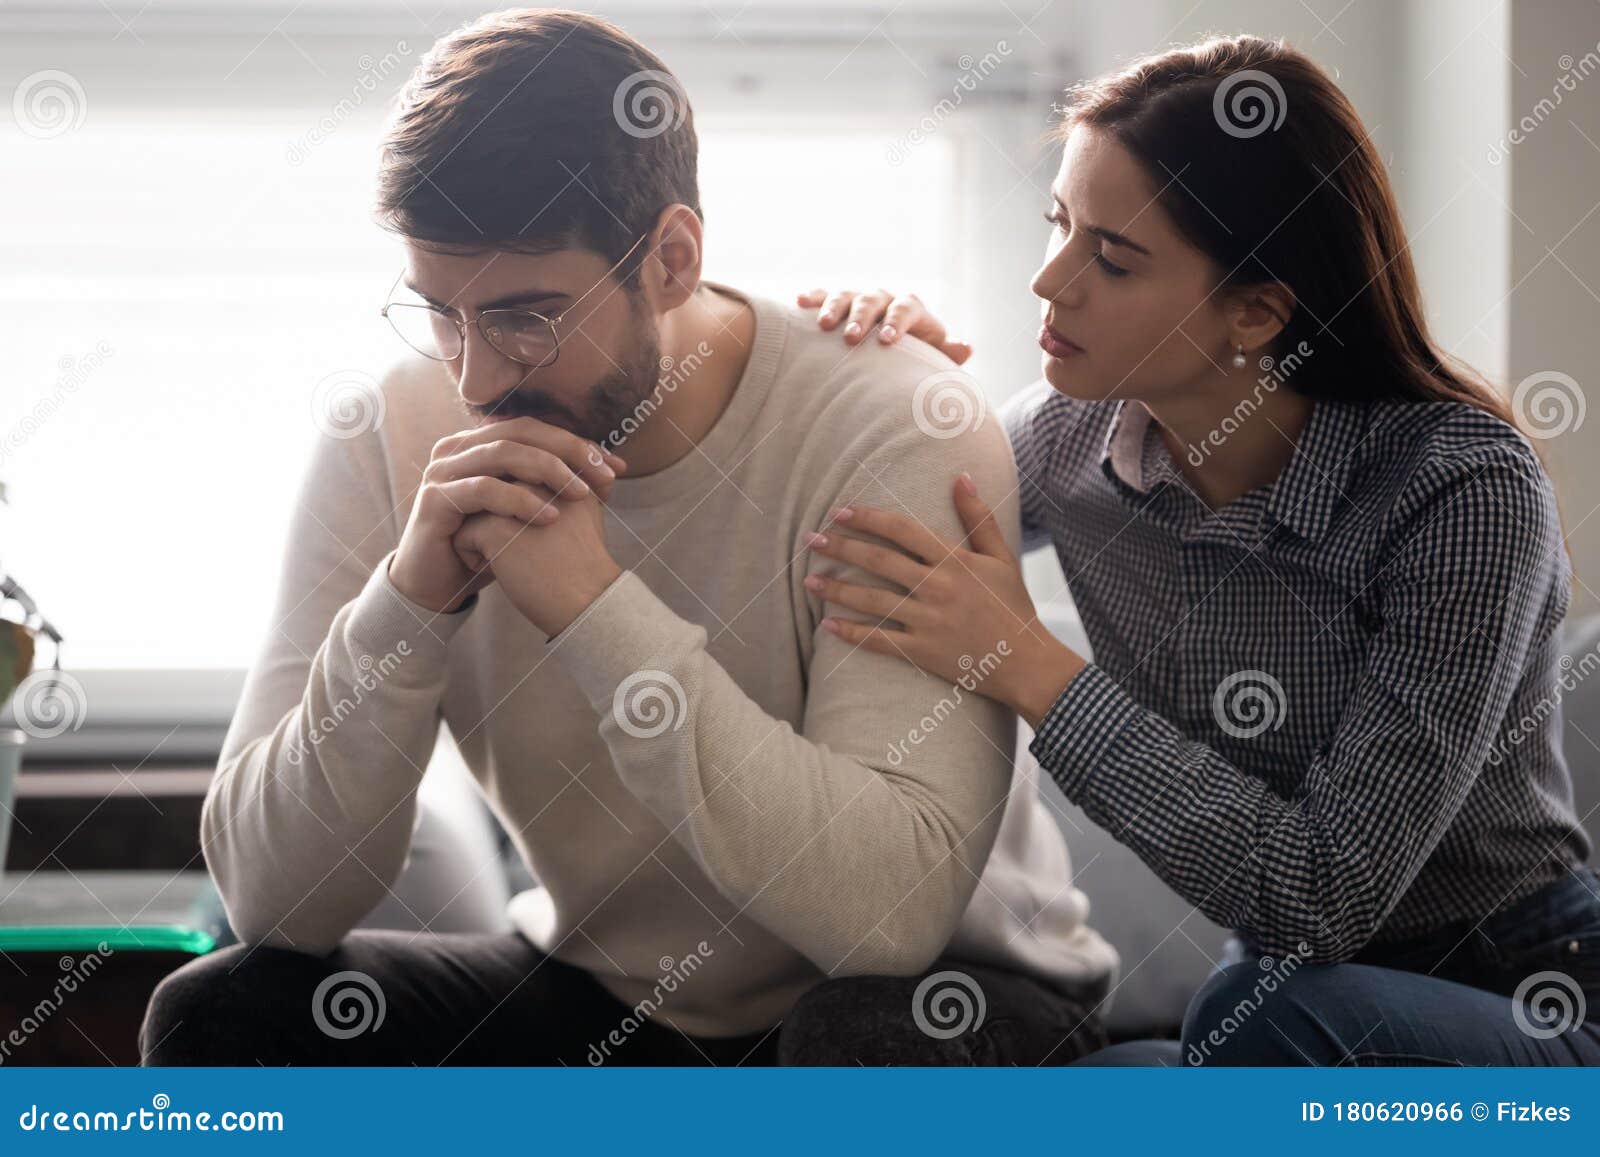  A concerned wife comforts her upset husband by putting a hand on his shoulder.